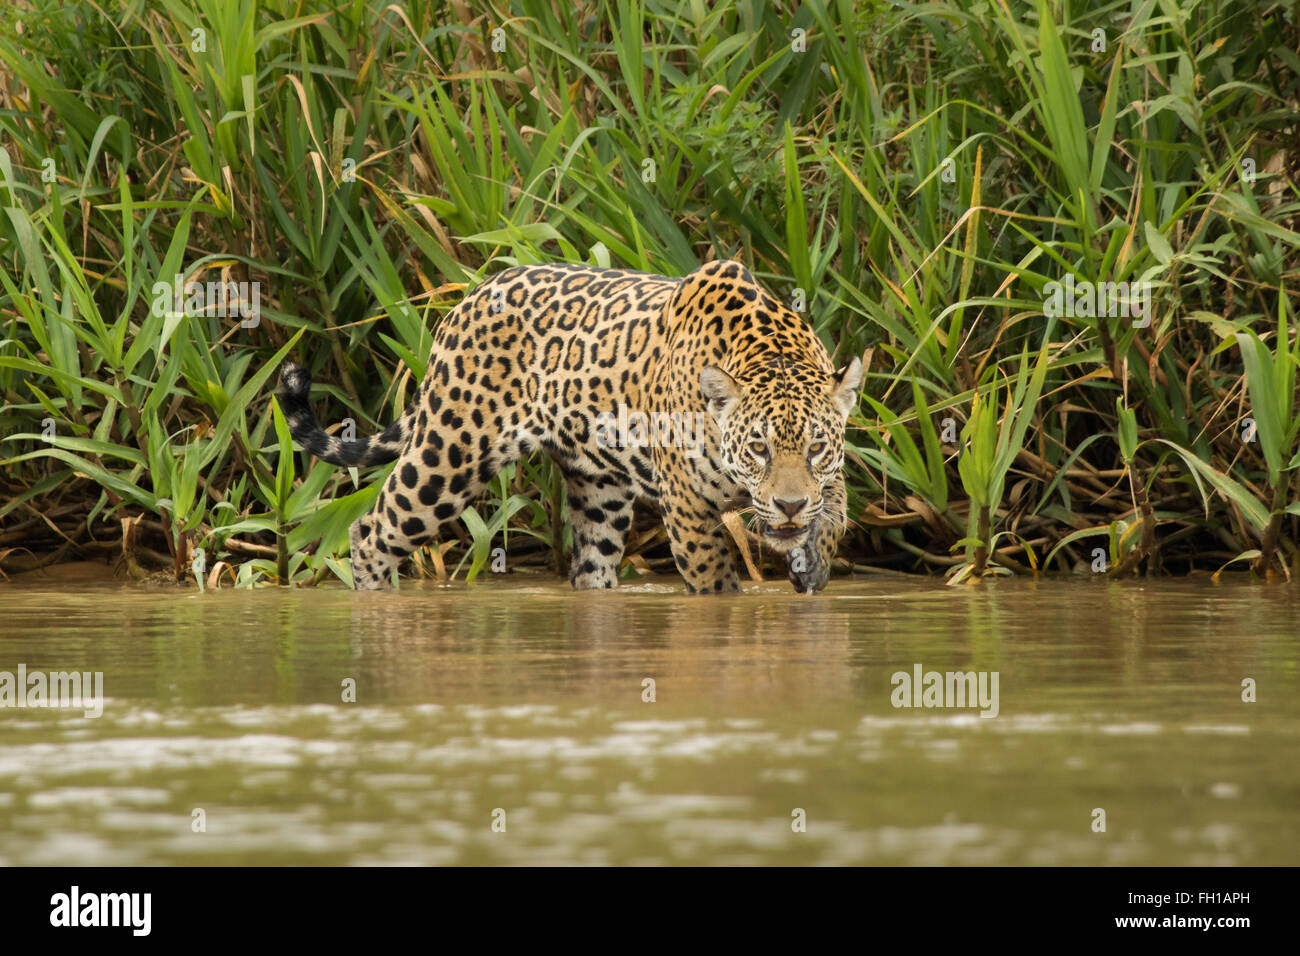 A wild sub-adult female jaguar stalks the bank of the Cuiaba river in the Pantanal, Brazil. Stock Photo